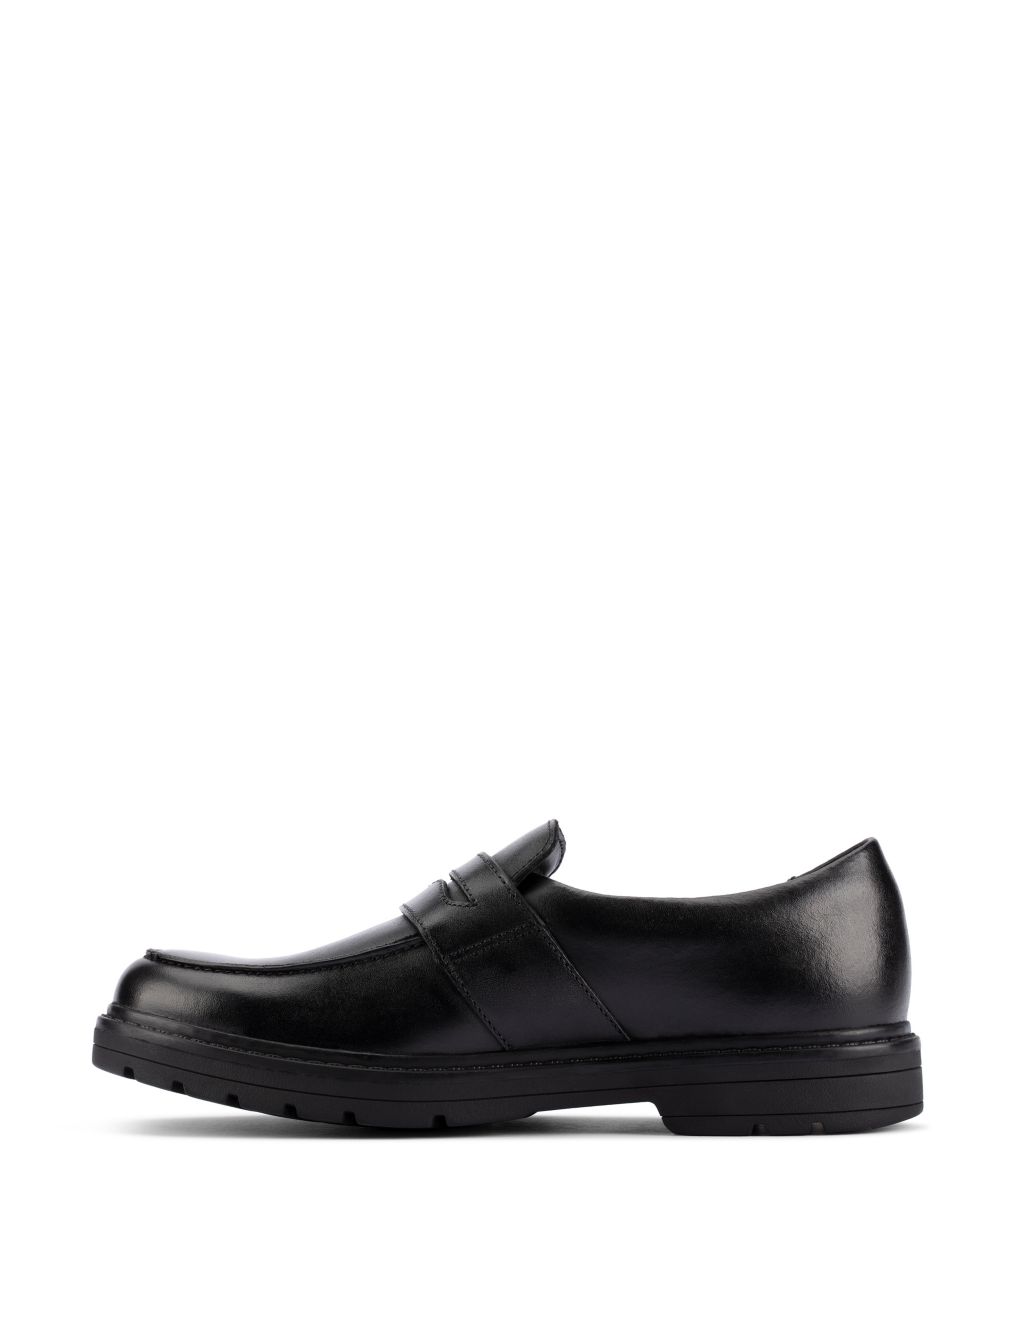 Kids' Leather Slip-On Loafers (3 Small - 7 Small) image 6